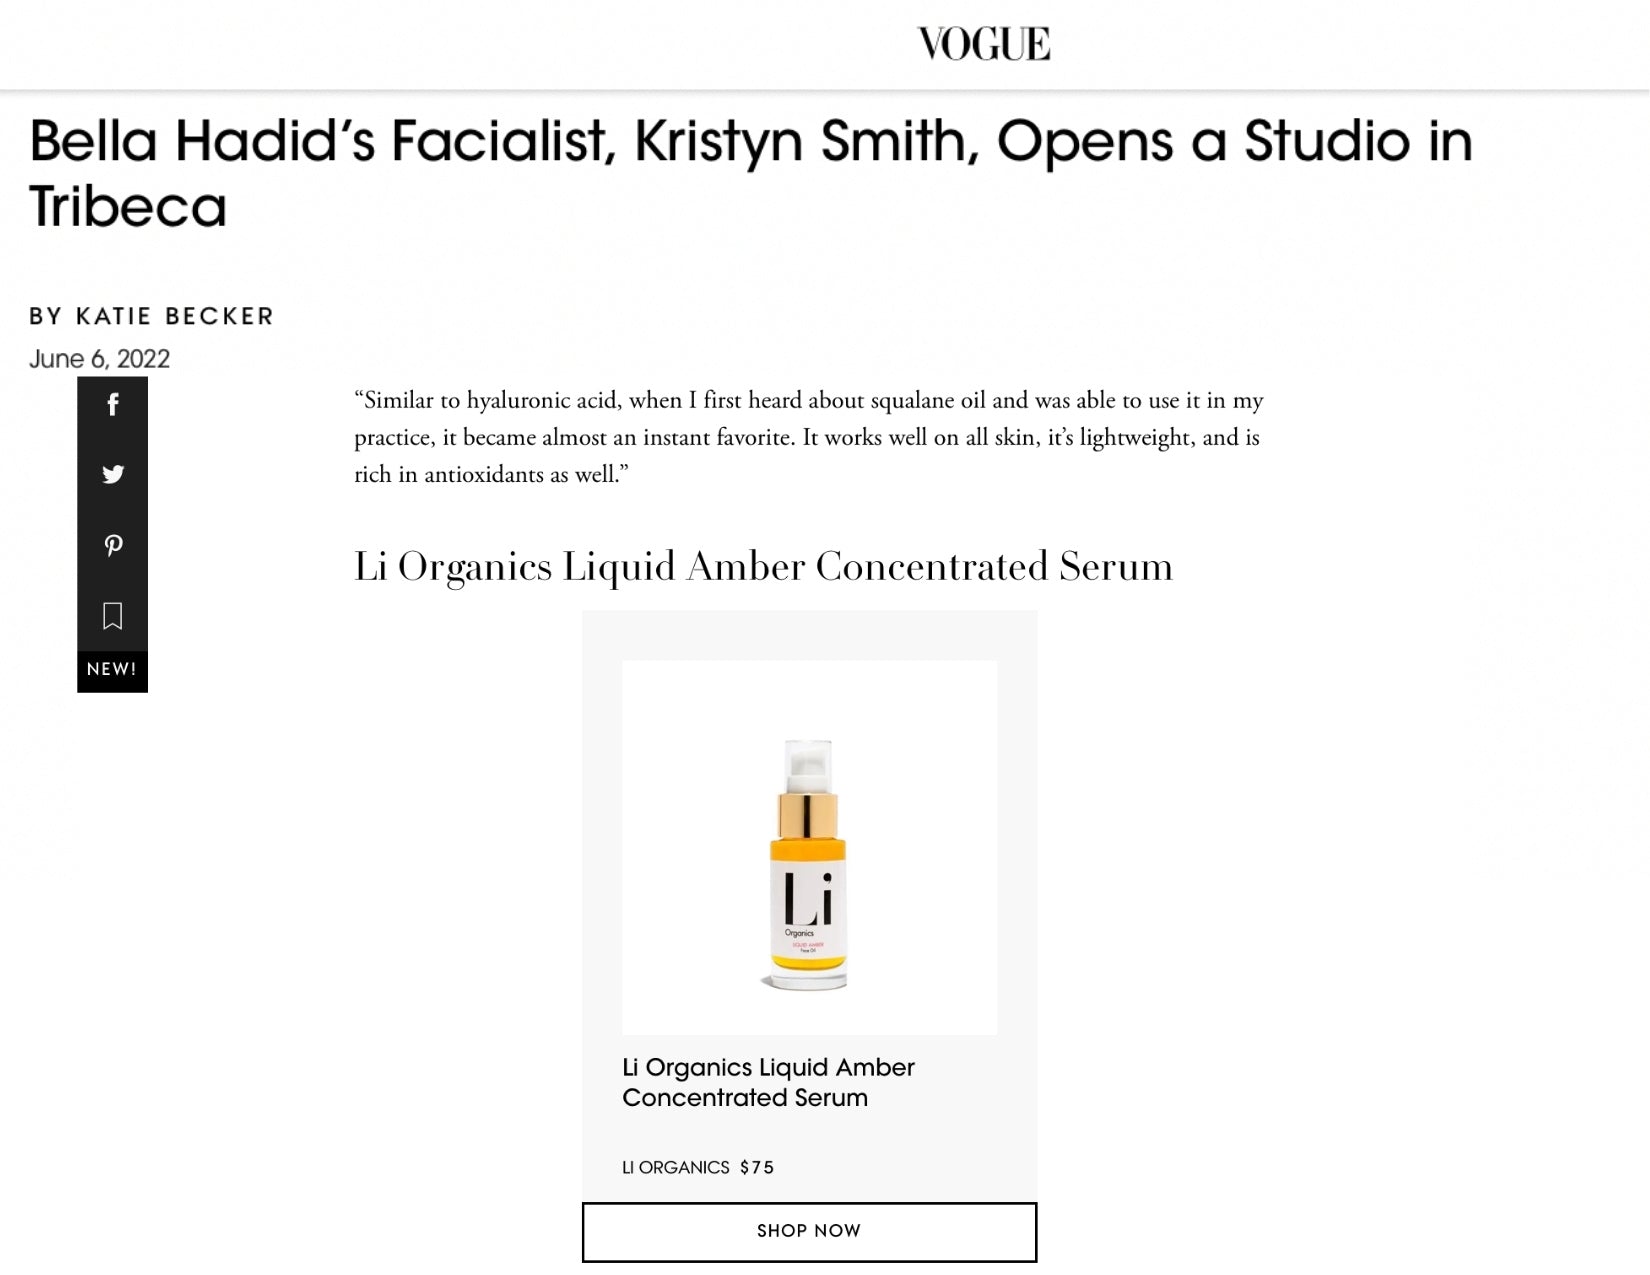 Bella Hadid's skincare routine, Recommended by Bella Hadid, What does Bella Hadid use for her skin, Kristyn Smith facials recommended products, Li Organics and Bella Hadid, Liquid Amber Serum, Kristyn Smith's favorite and top recommended products.